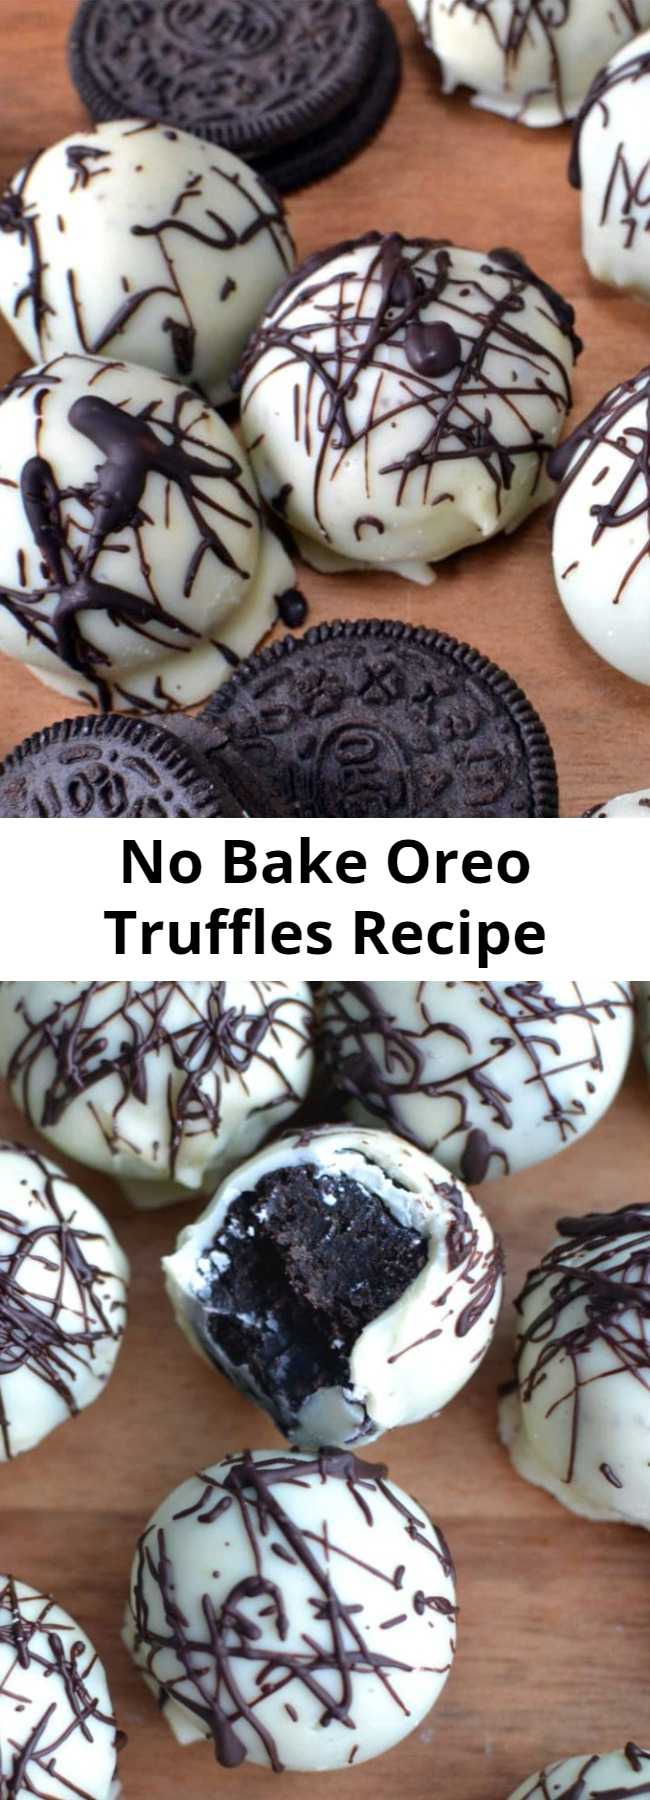 No Bake Oreo Truffles Recipe - These no bake Oreo Truffles have a sweet outer chocolate shell that surrounds a decadent, chocolate Oreo filling- and you only need 4 ingredients! #nobake #Oreos